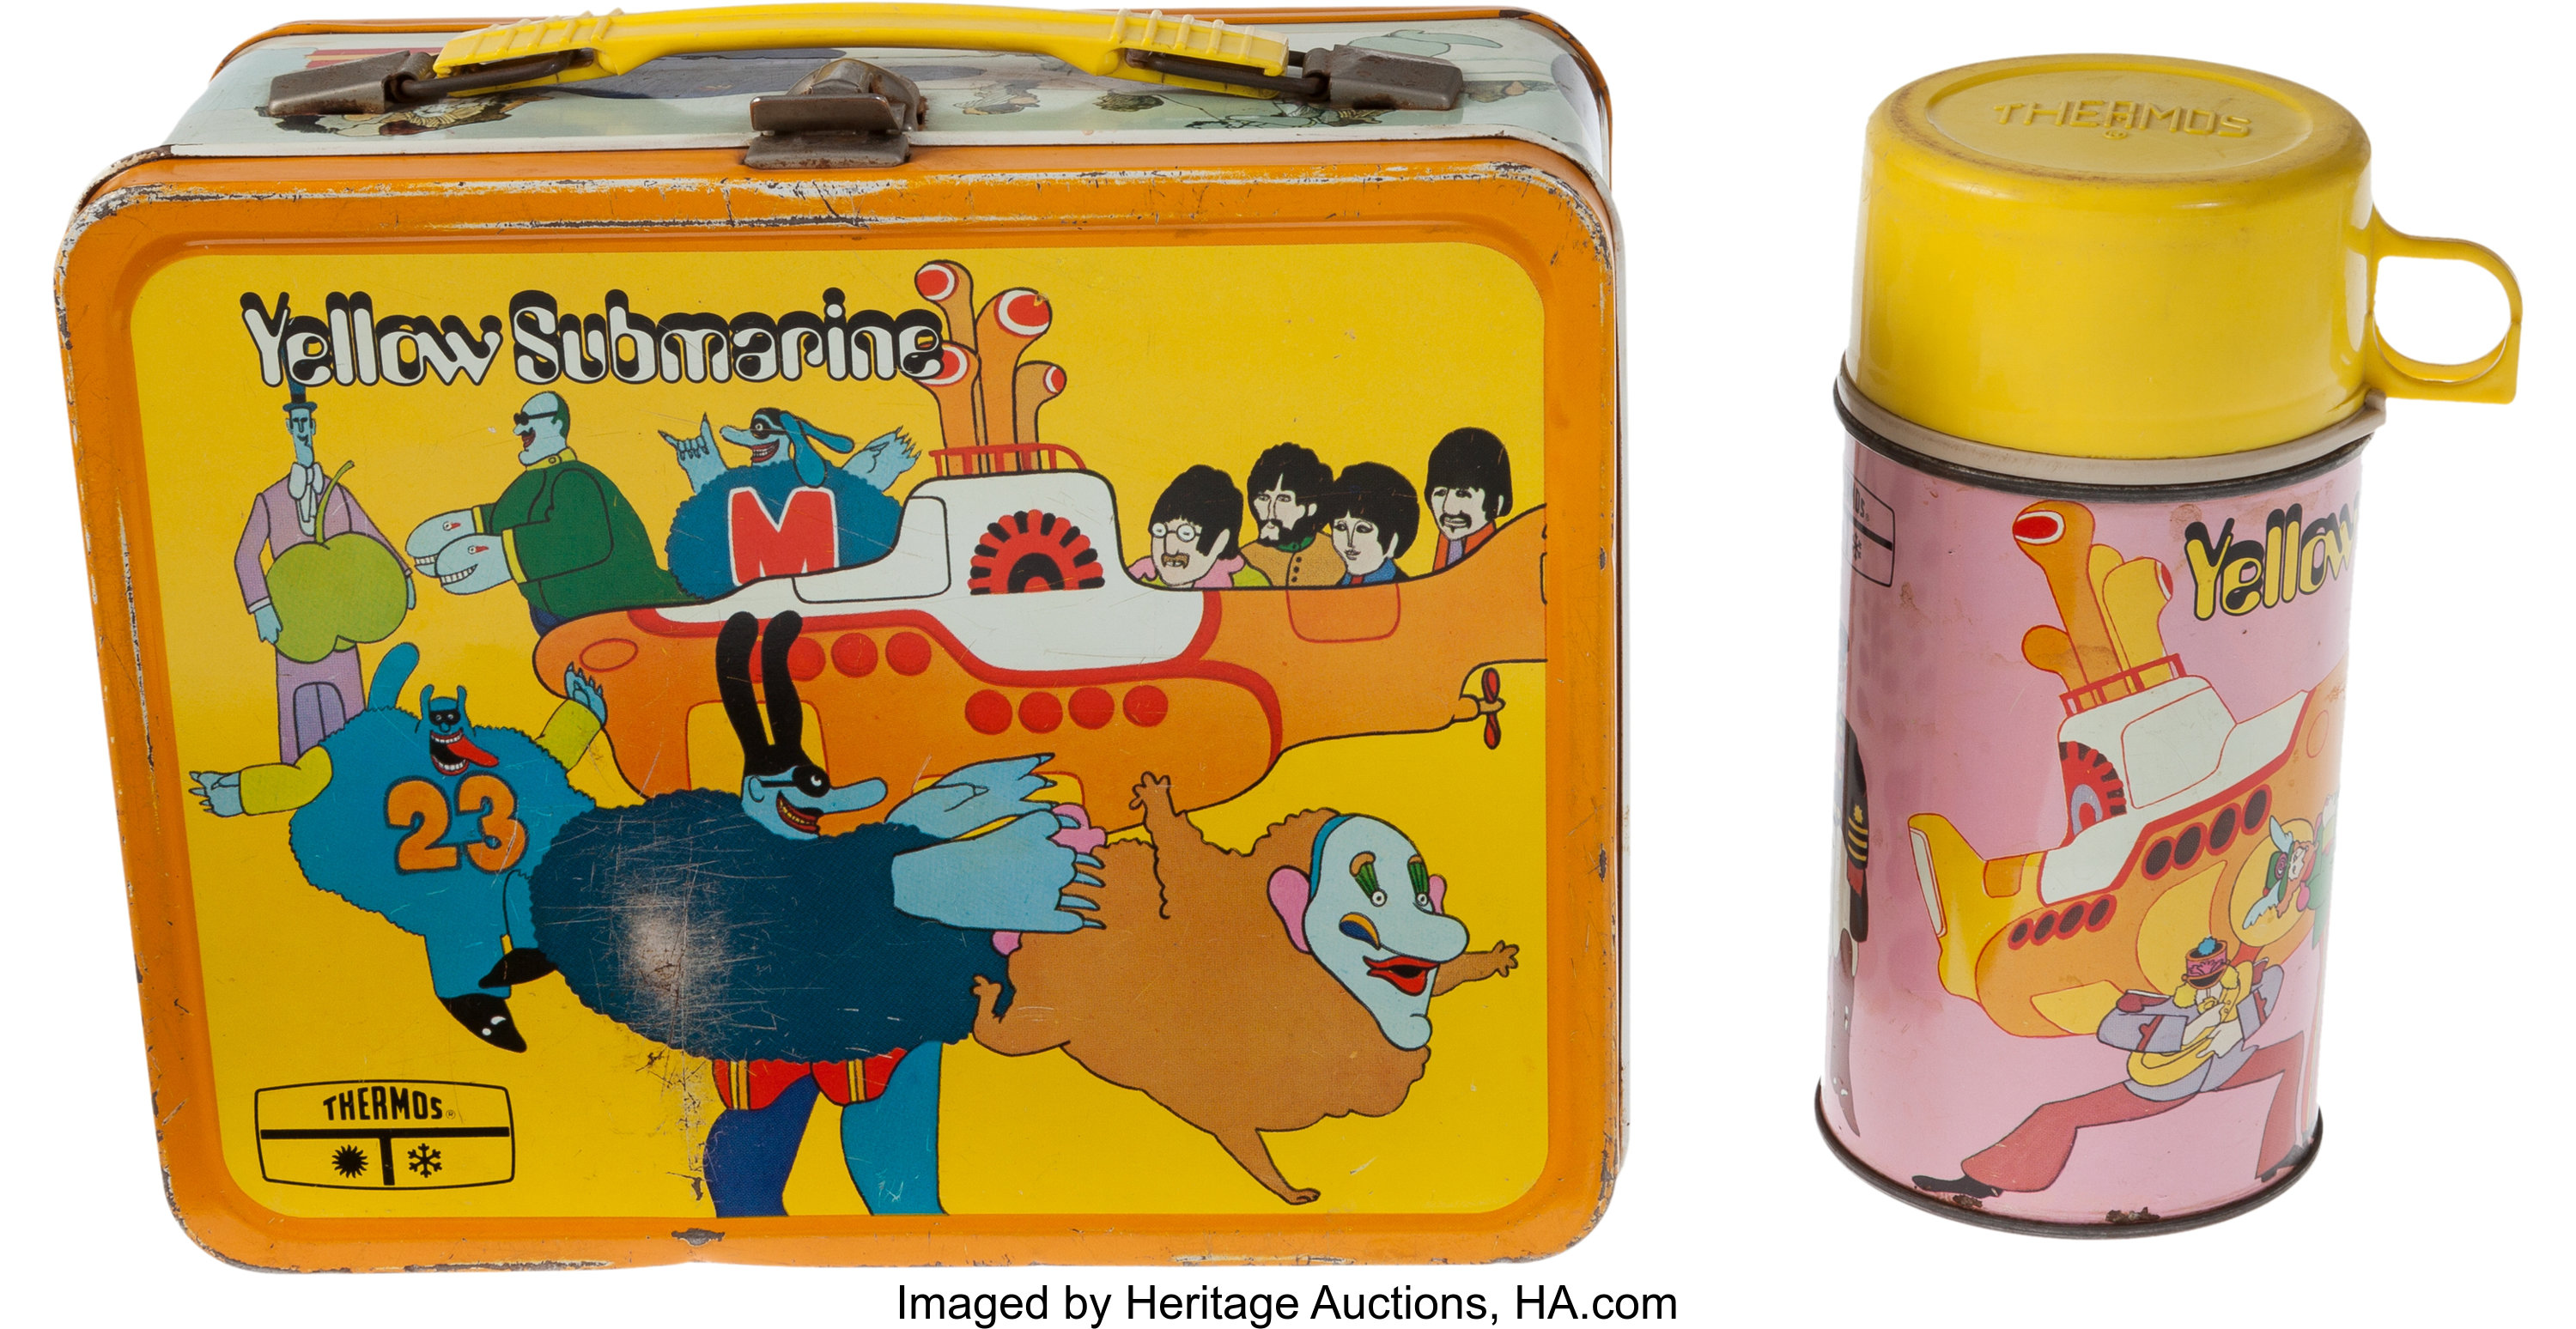 Beatles Yellow Submarine Lunch Box And Thermos Music Lot 47019 Heritage Auctions 9959